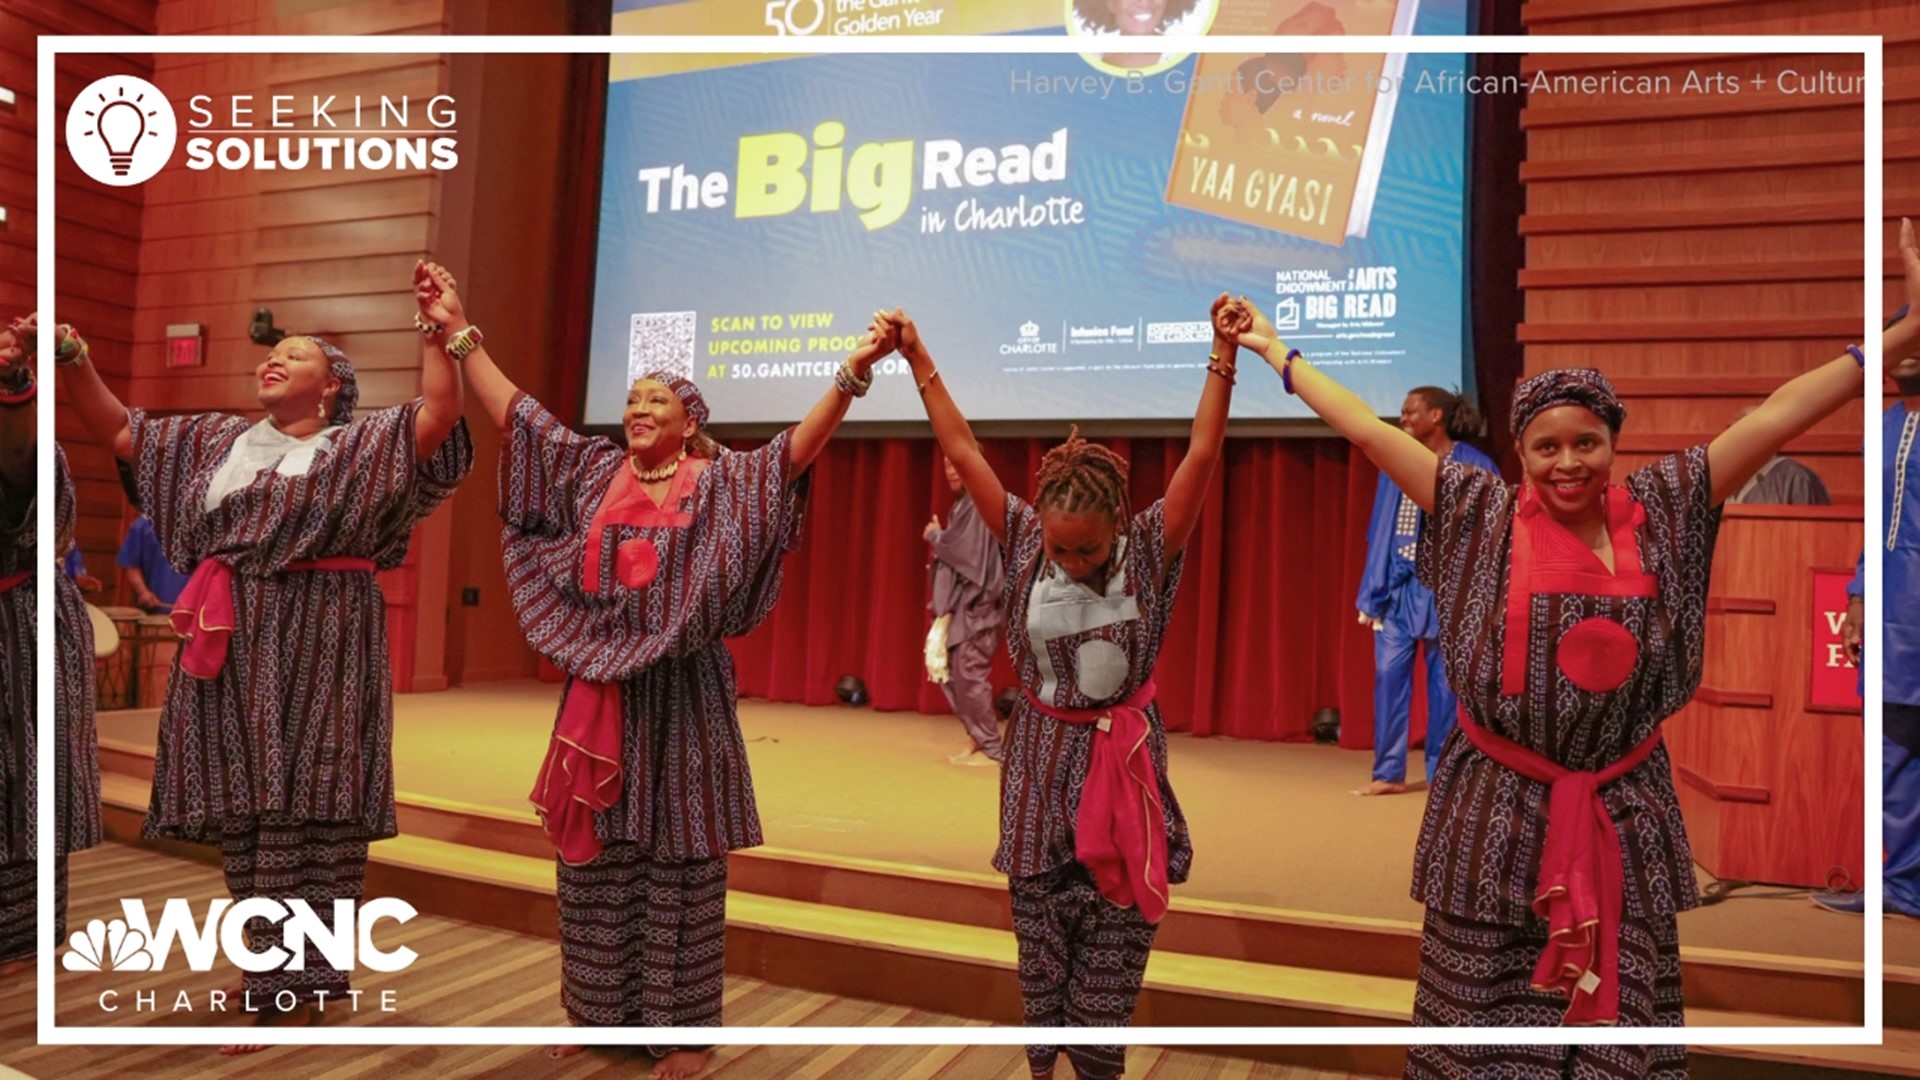 Charlotte is one of 62 communities across the country taking part in this year’s National Endowment for the Arts’ Big Read.